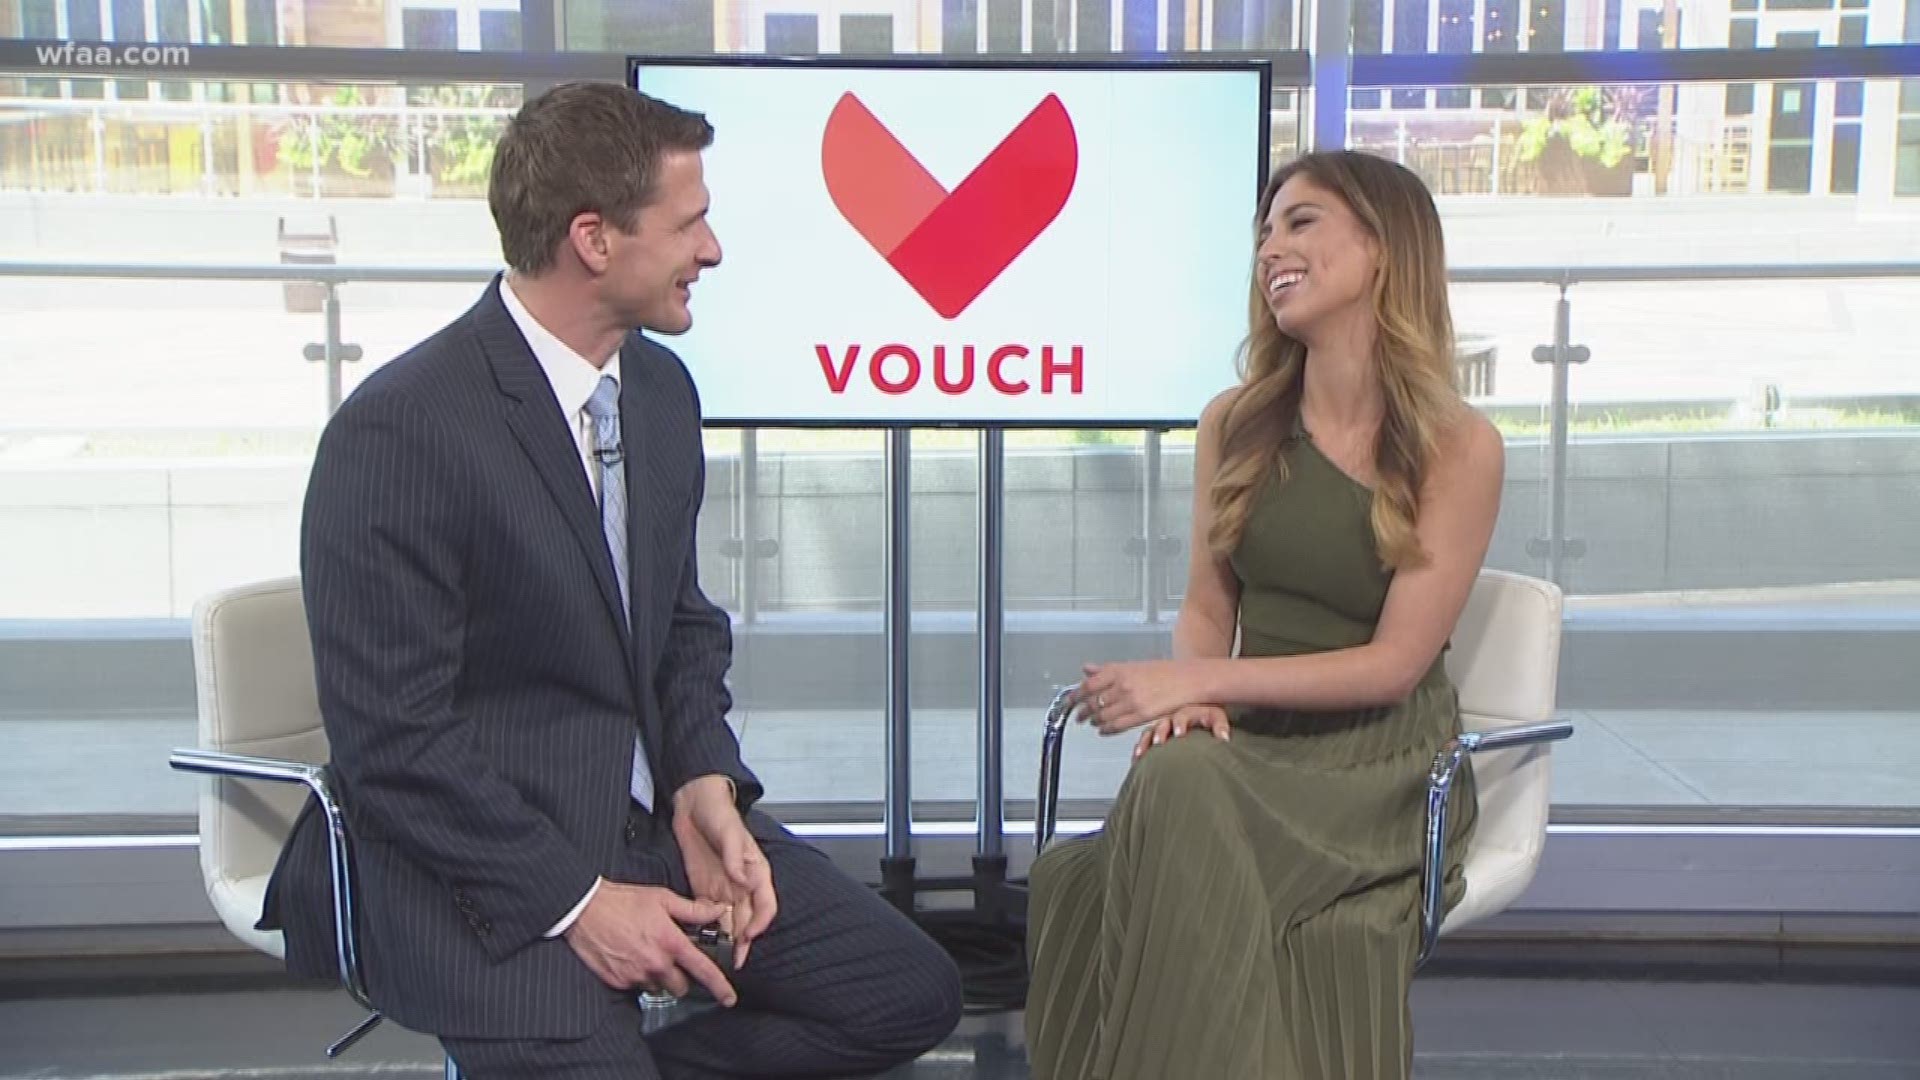 Sean Lowe co-founds "Vouch", a dating app just named one of the Top 10 DFW Start-Ups